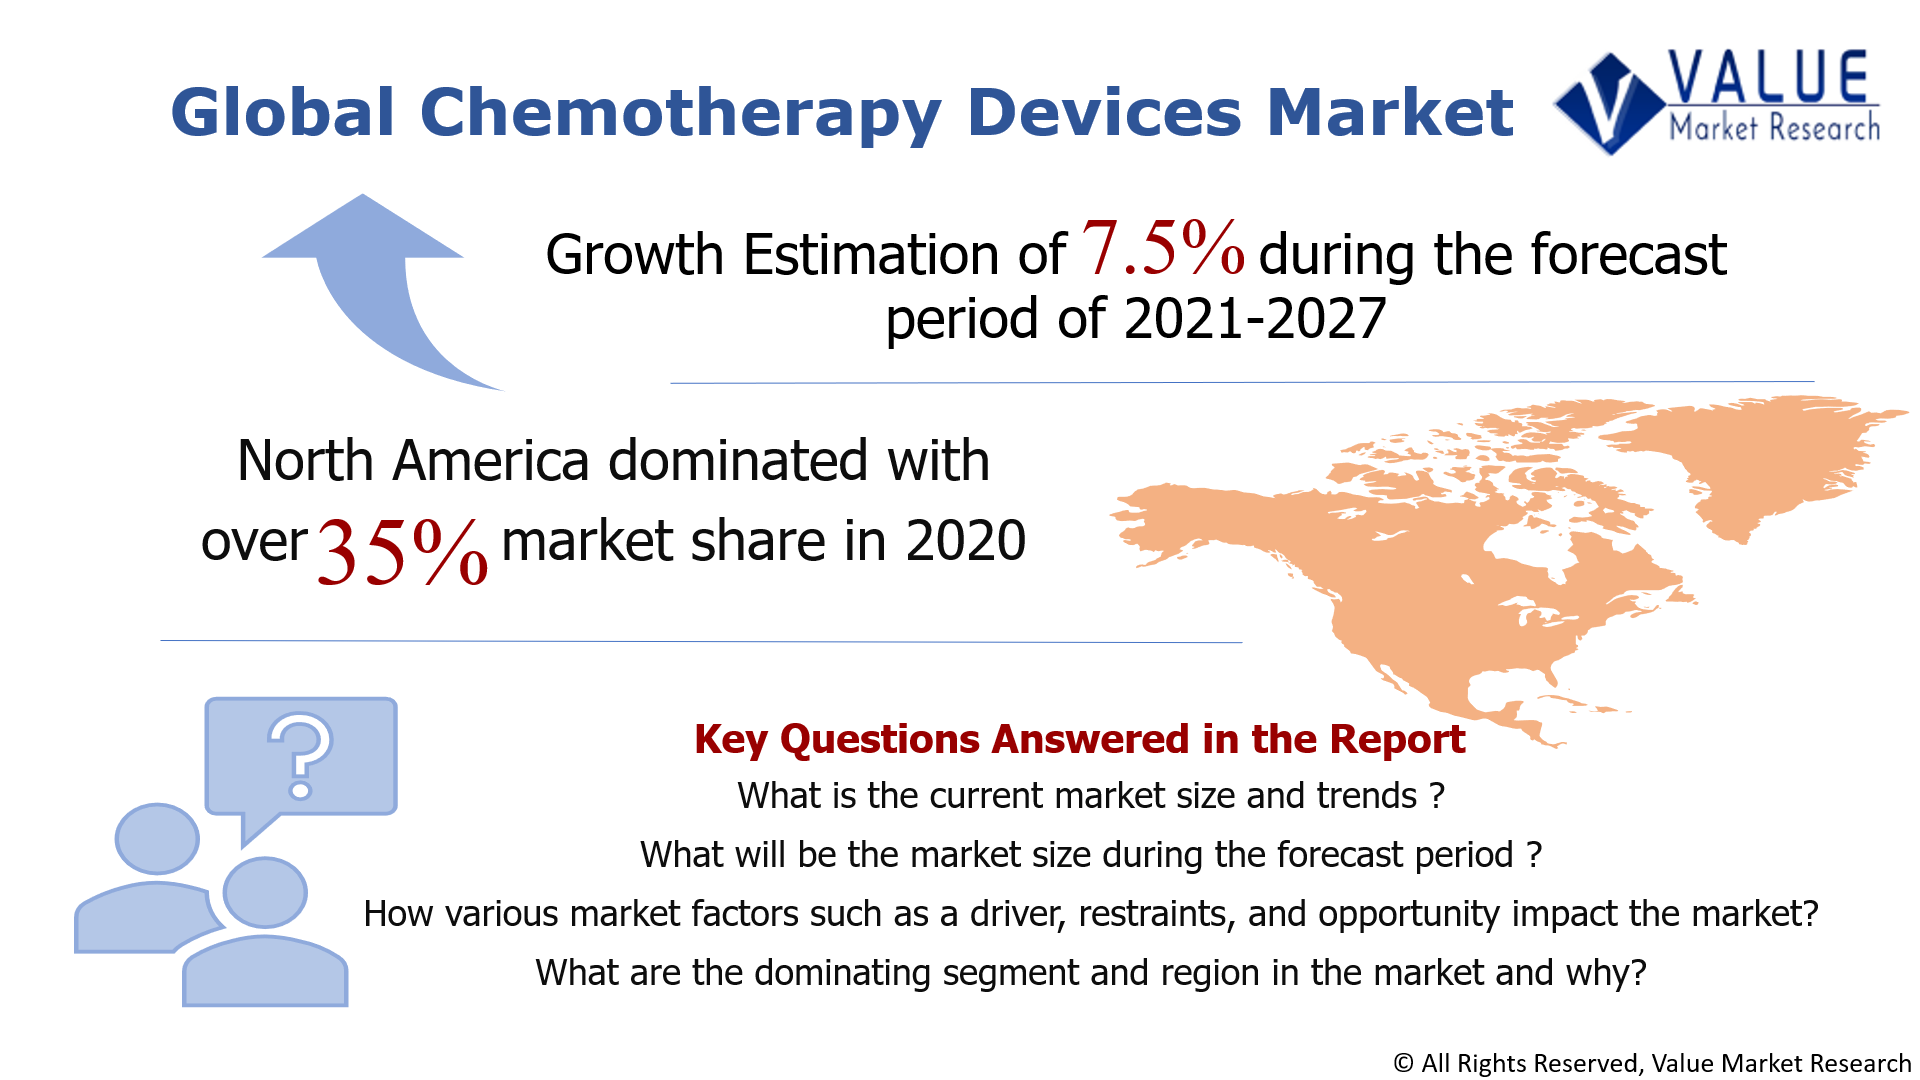 Global Chemotherapy Devices Market Share